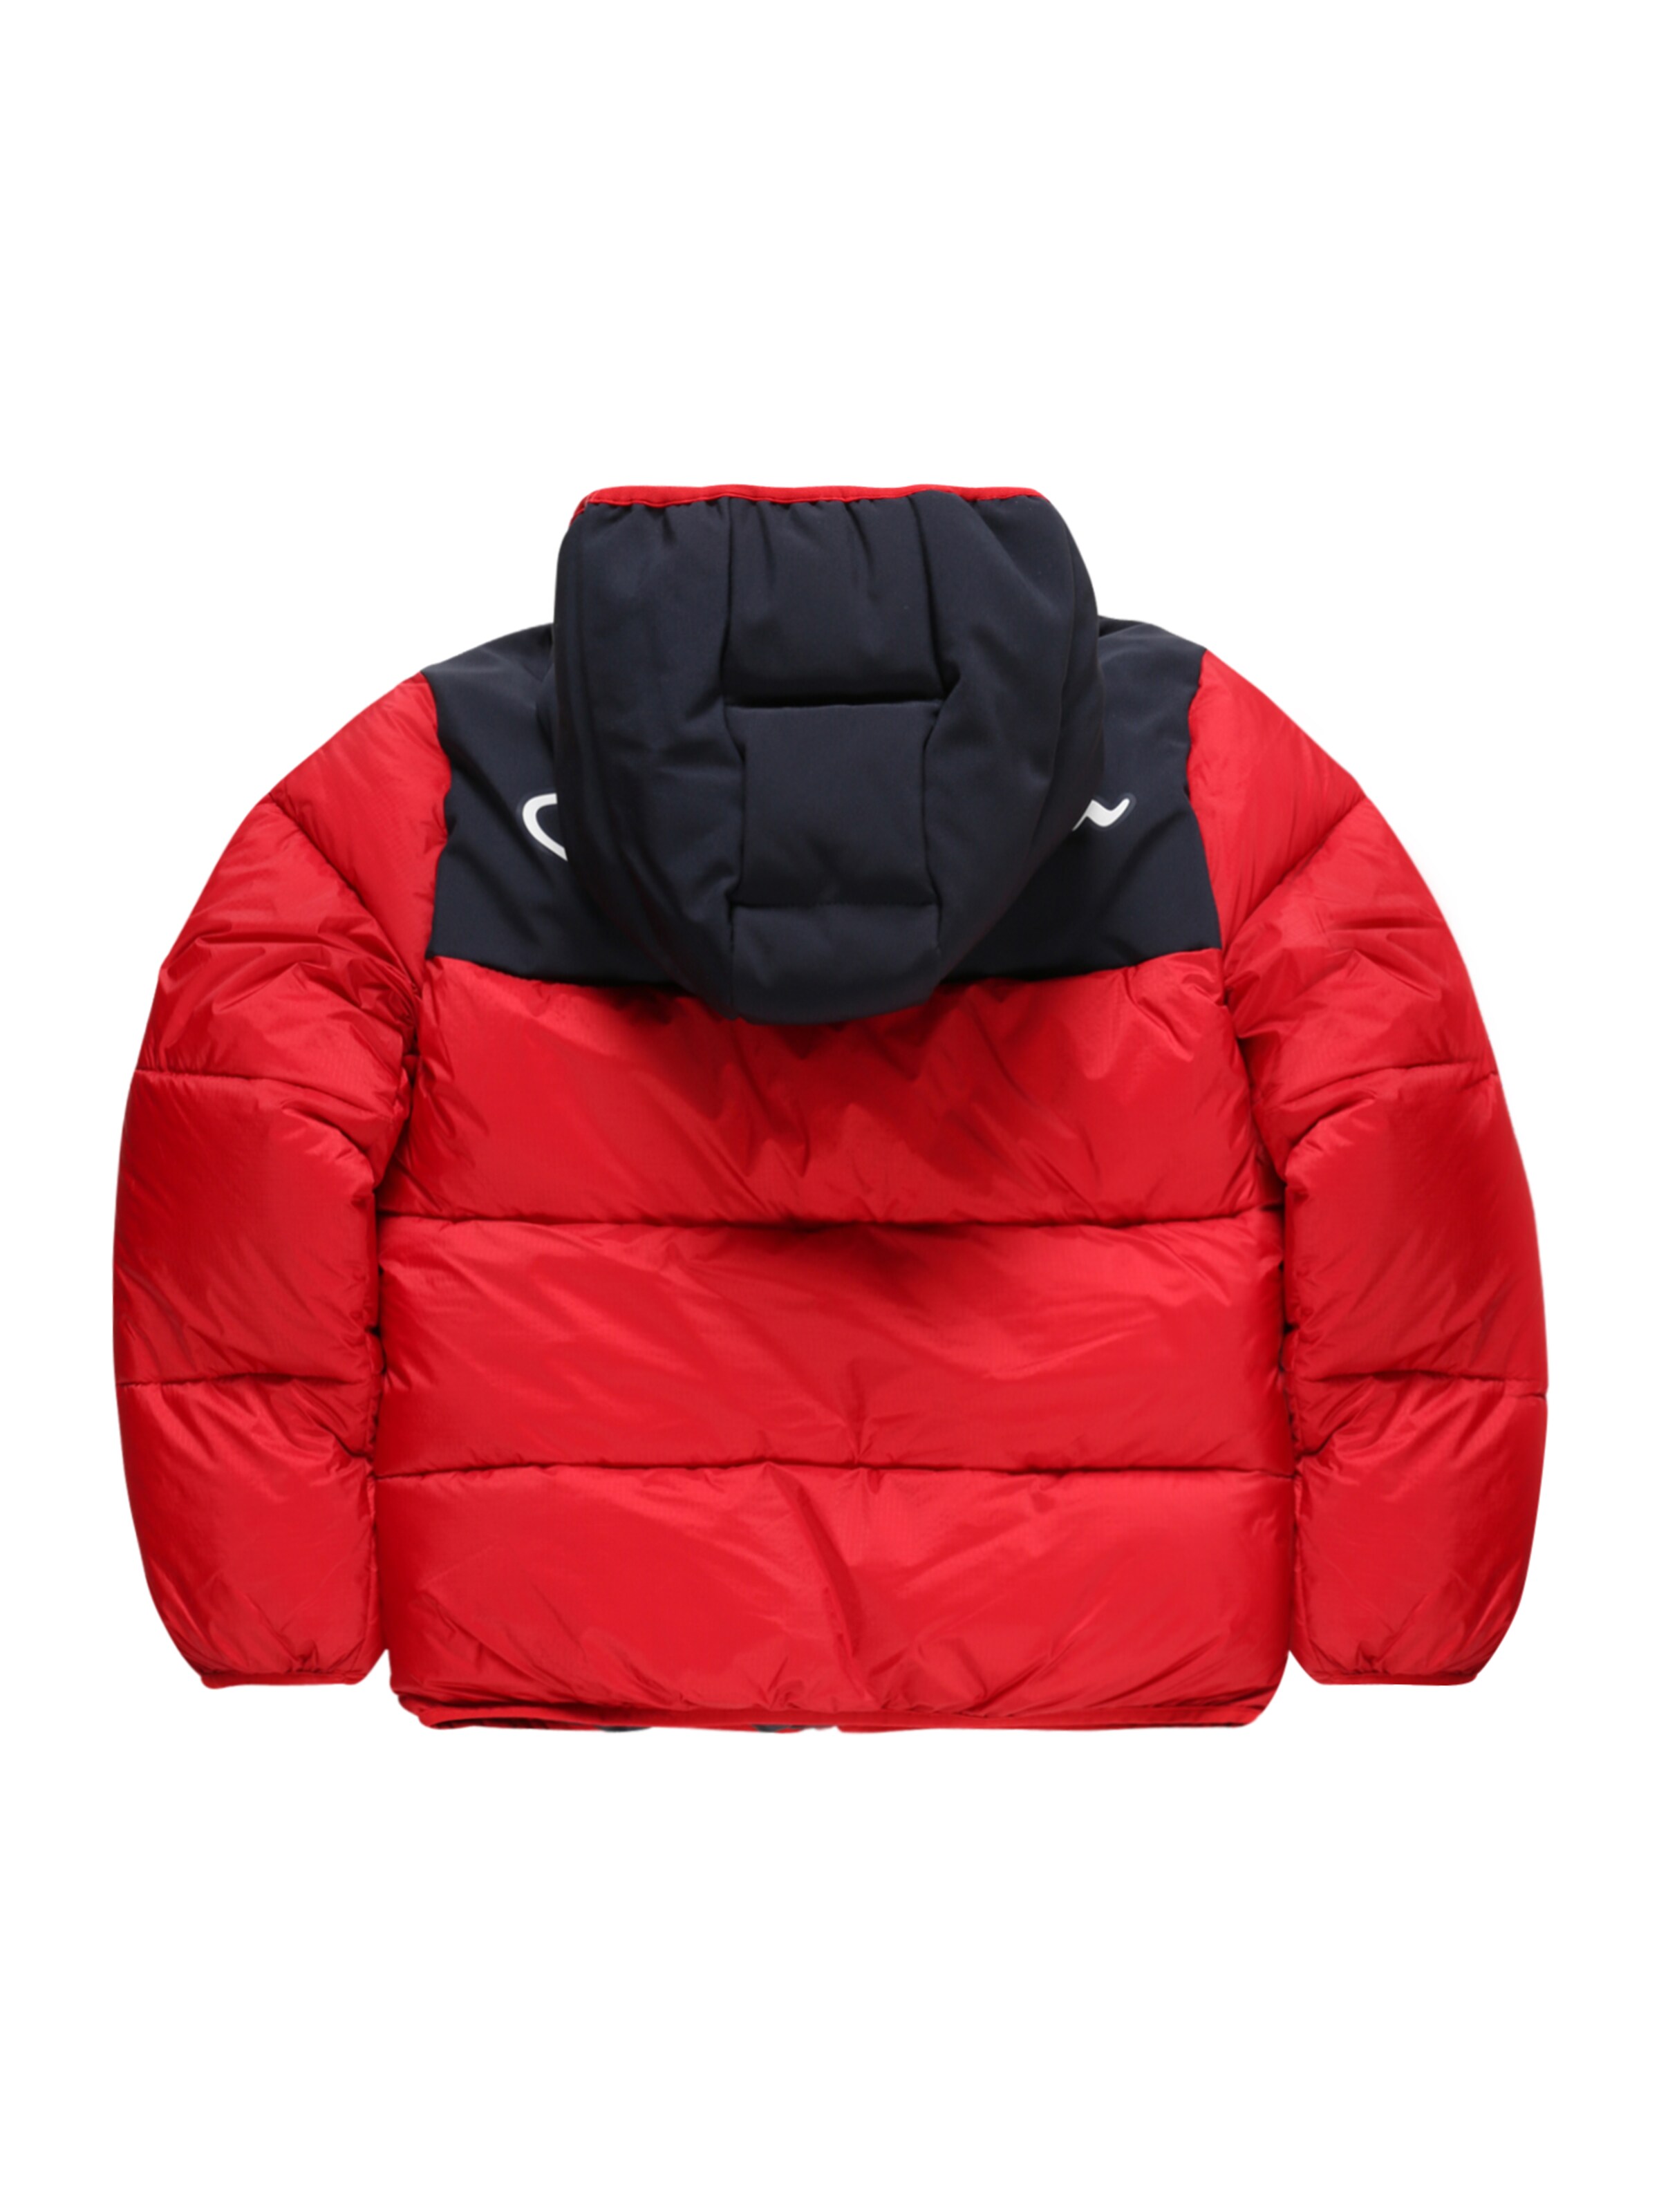 Kinder Teens (Gr. 140-176) Champion Authentic Athletic Apparel Jacke in Hellrot - MS16462